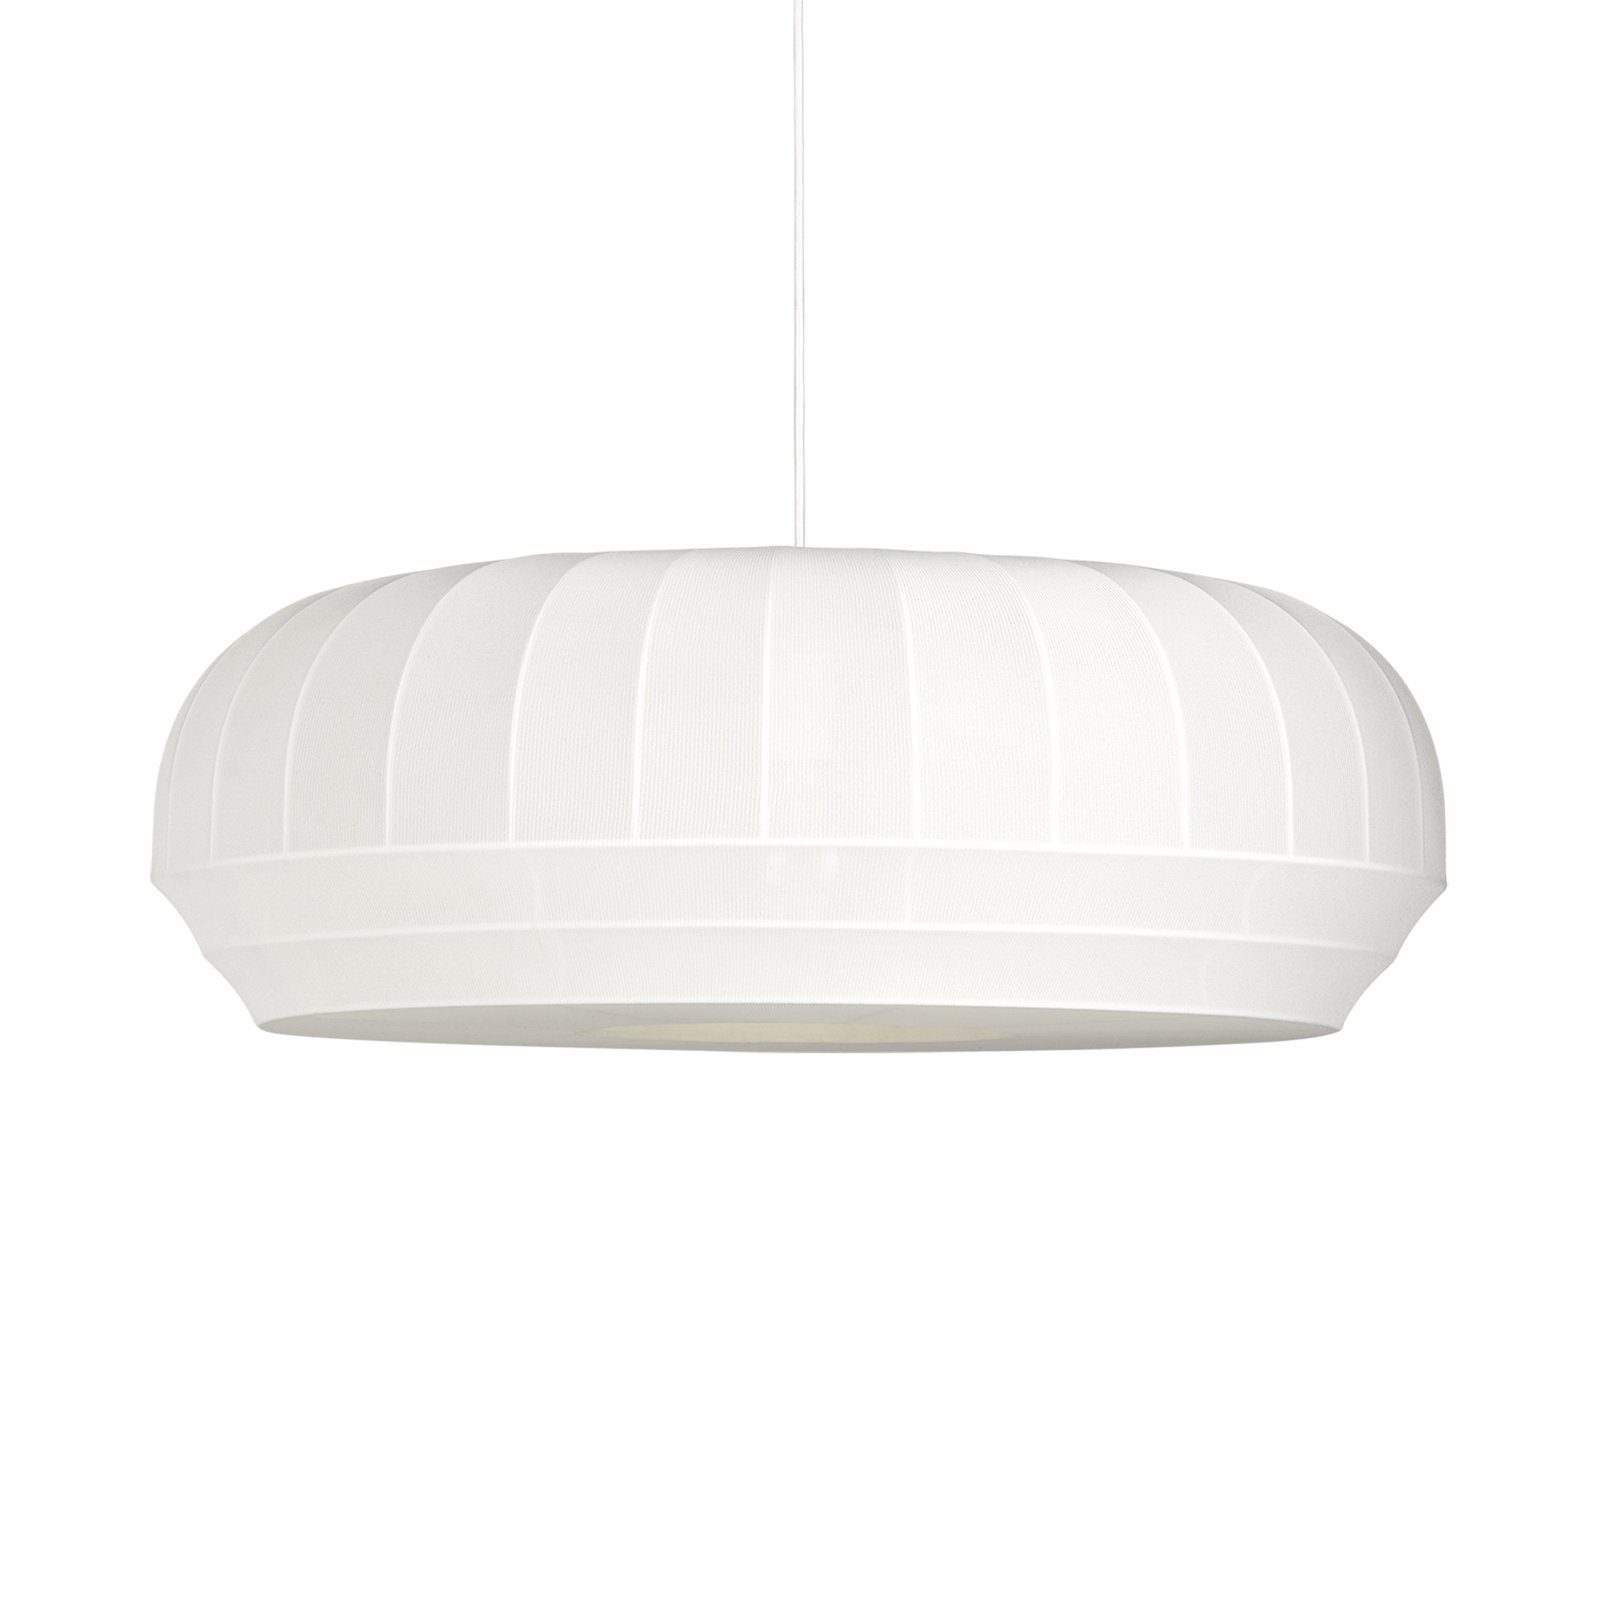 Northern Tradition large oval pendant light